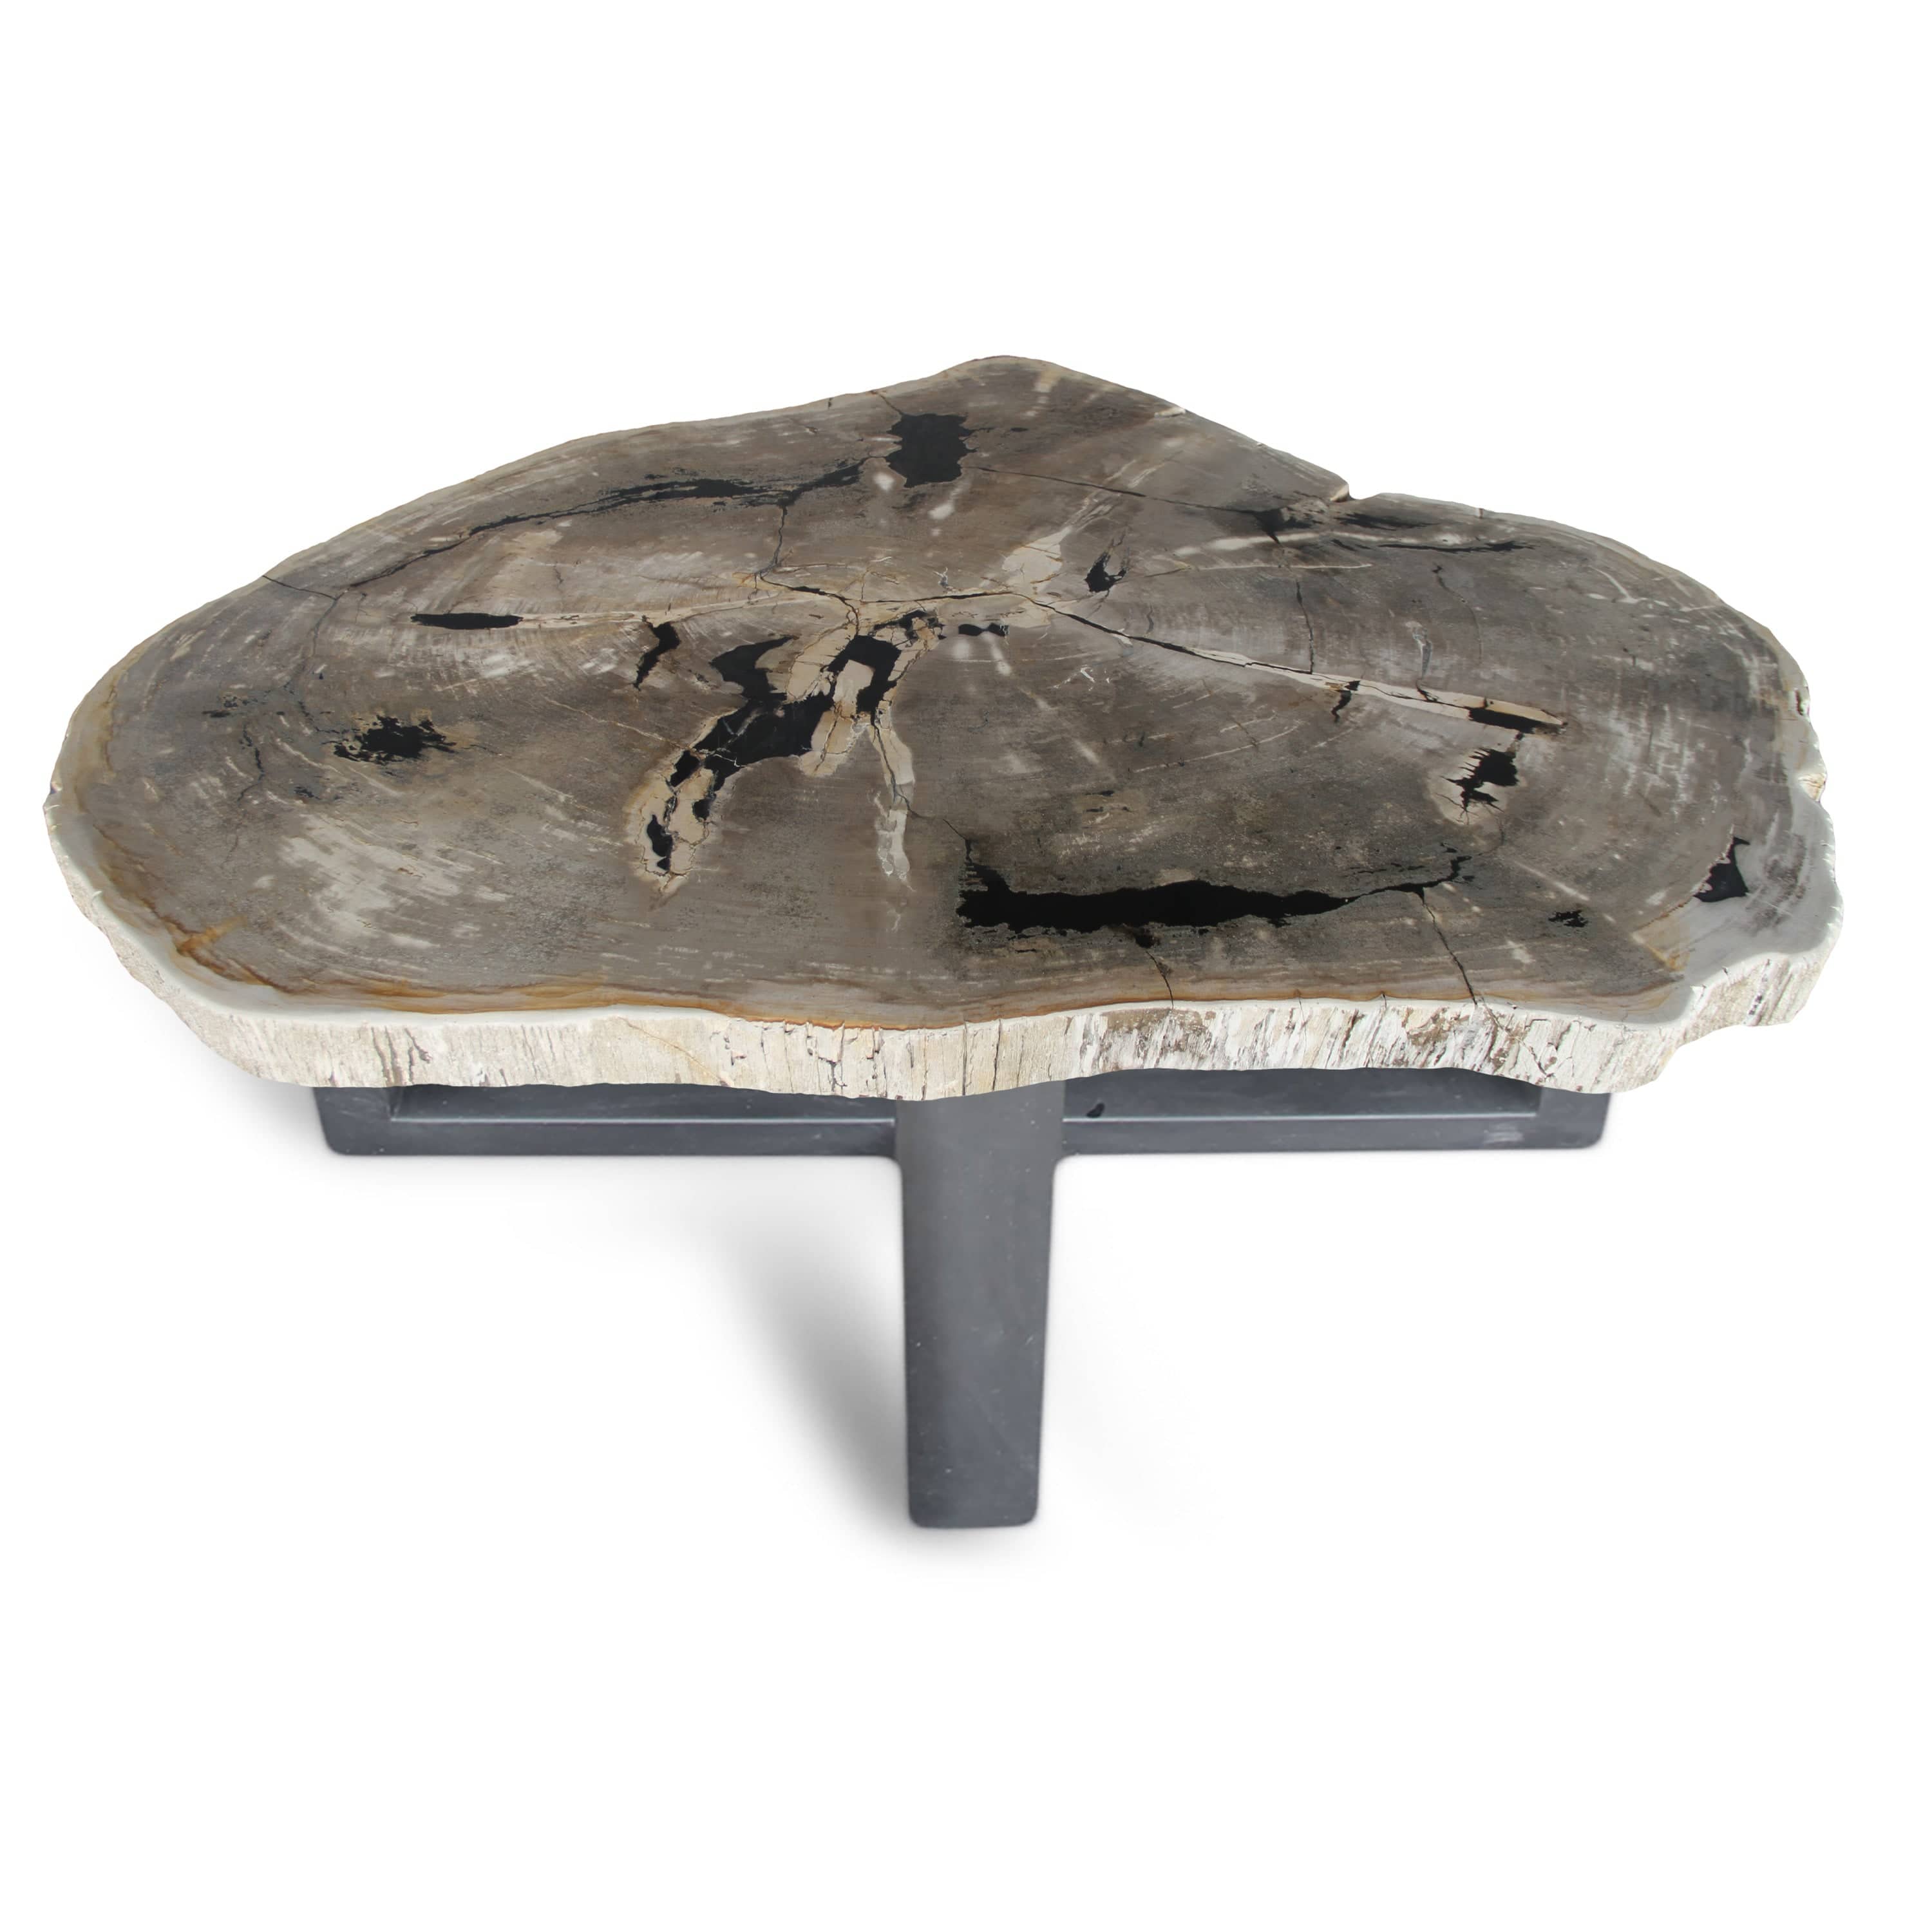 Kalifano Petrified Wood Petrified Wood Round Slab Coffee Table from Indonesia - 61" / 466 lbs PWT17000.001